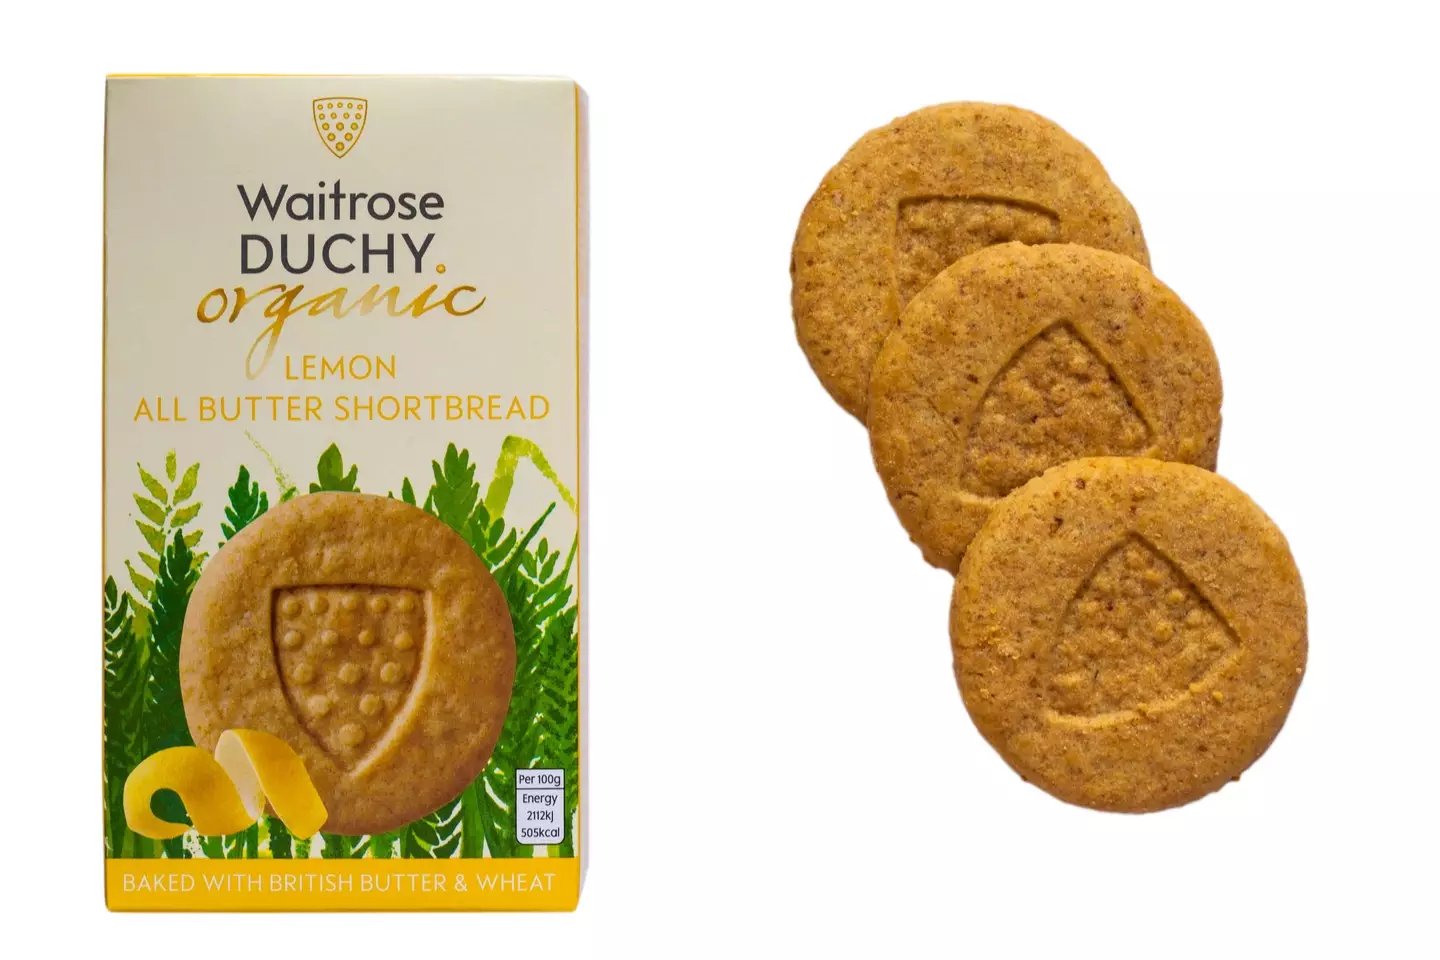 Waitrose will probably get their Royal Warrant considering they stock food made by King Charles III.